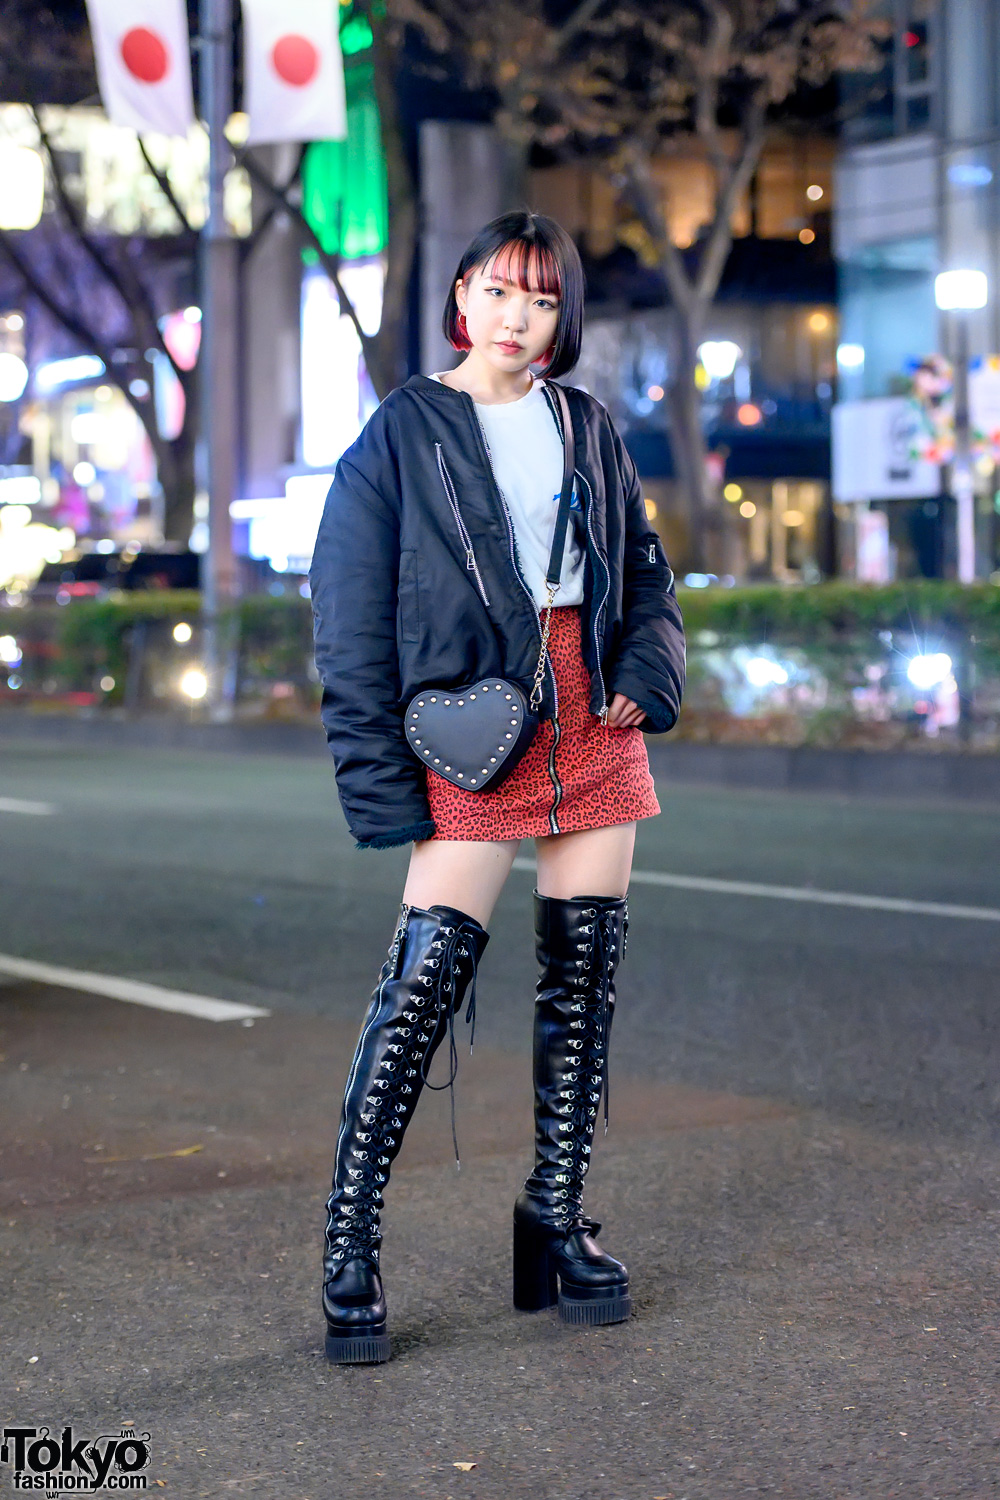 Harajuku Girl w/ Pink Bob Hairstyle in Lamoda Lace-Up Boots, Bomber Jacket, Chucla by Spinns